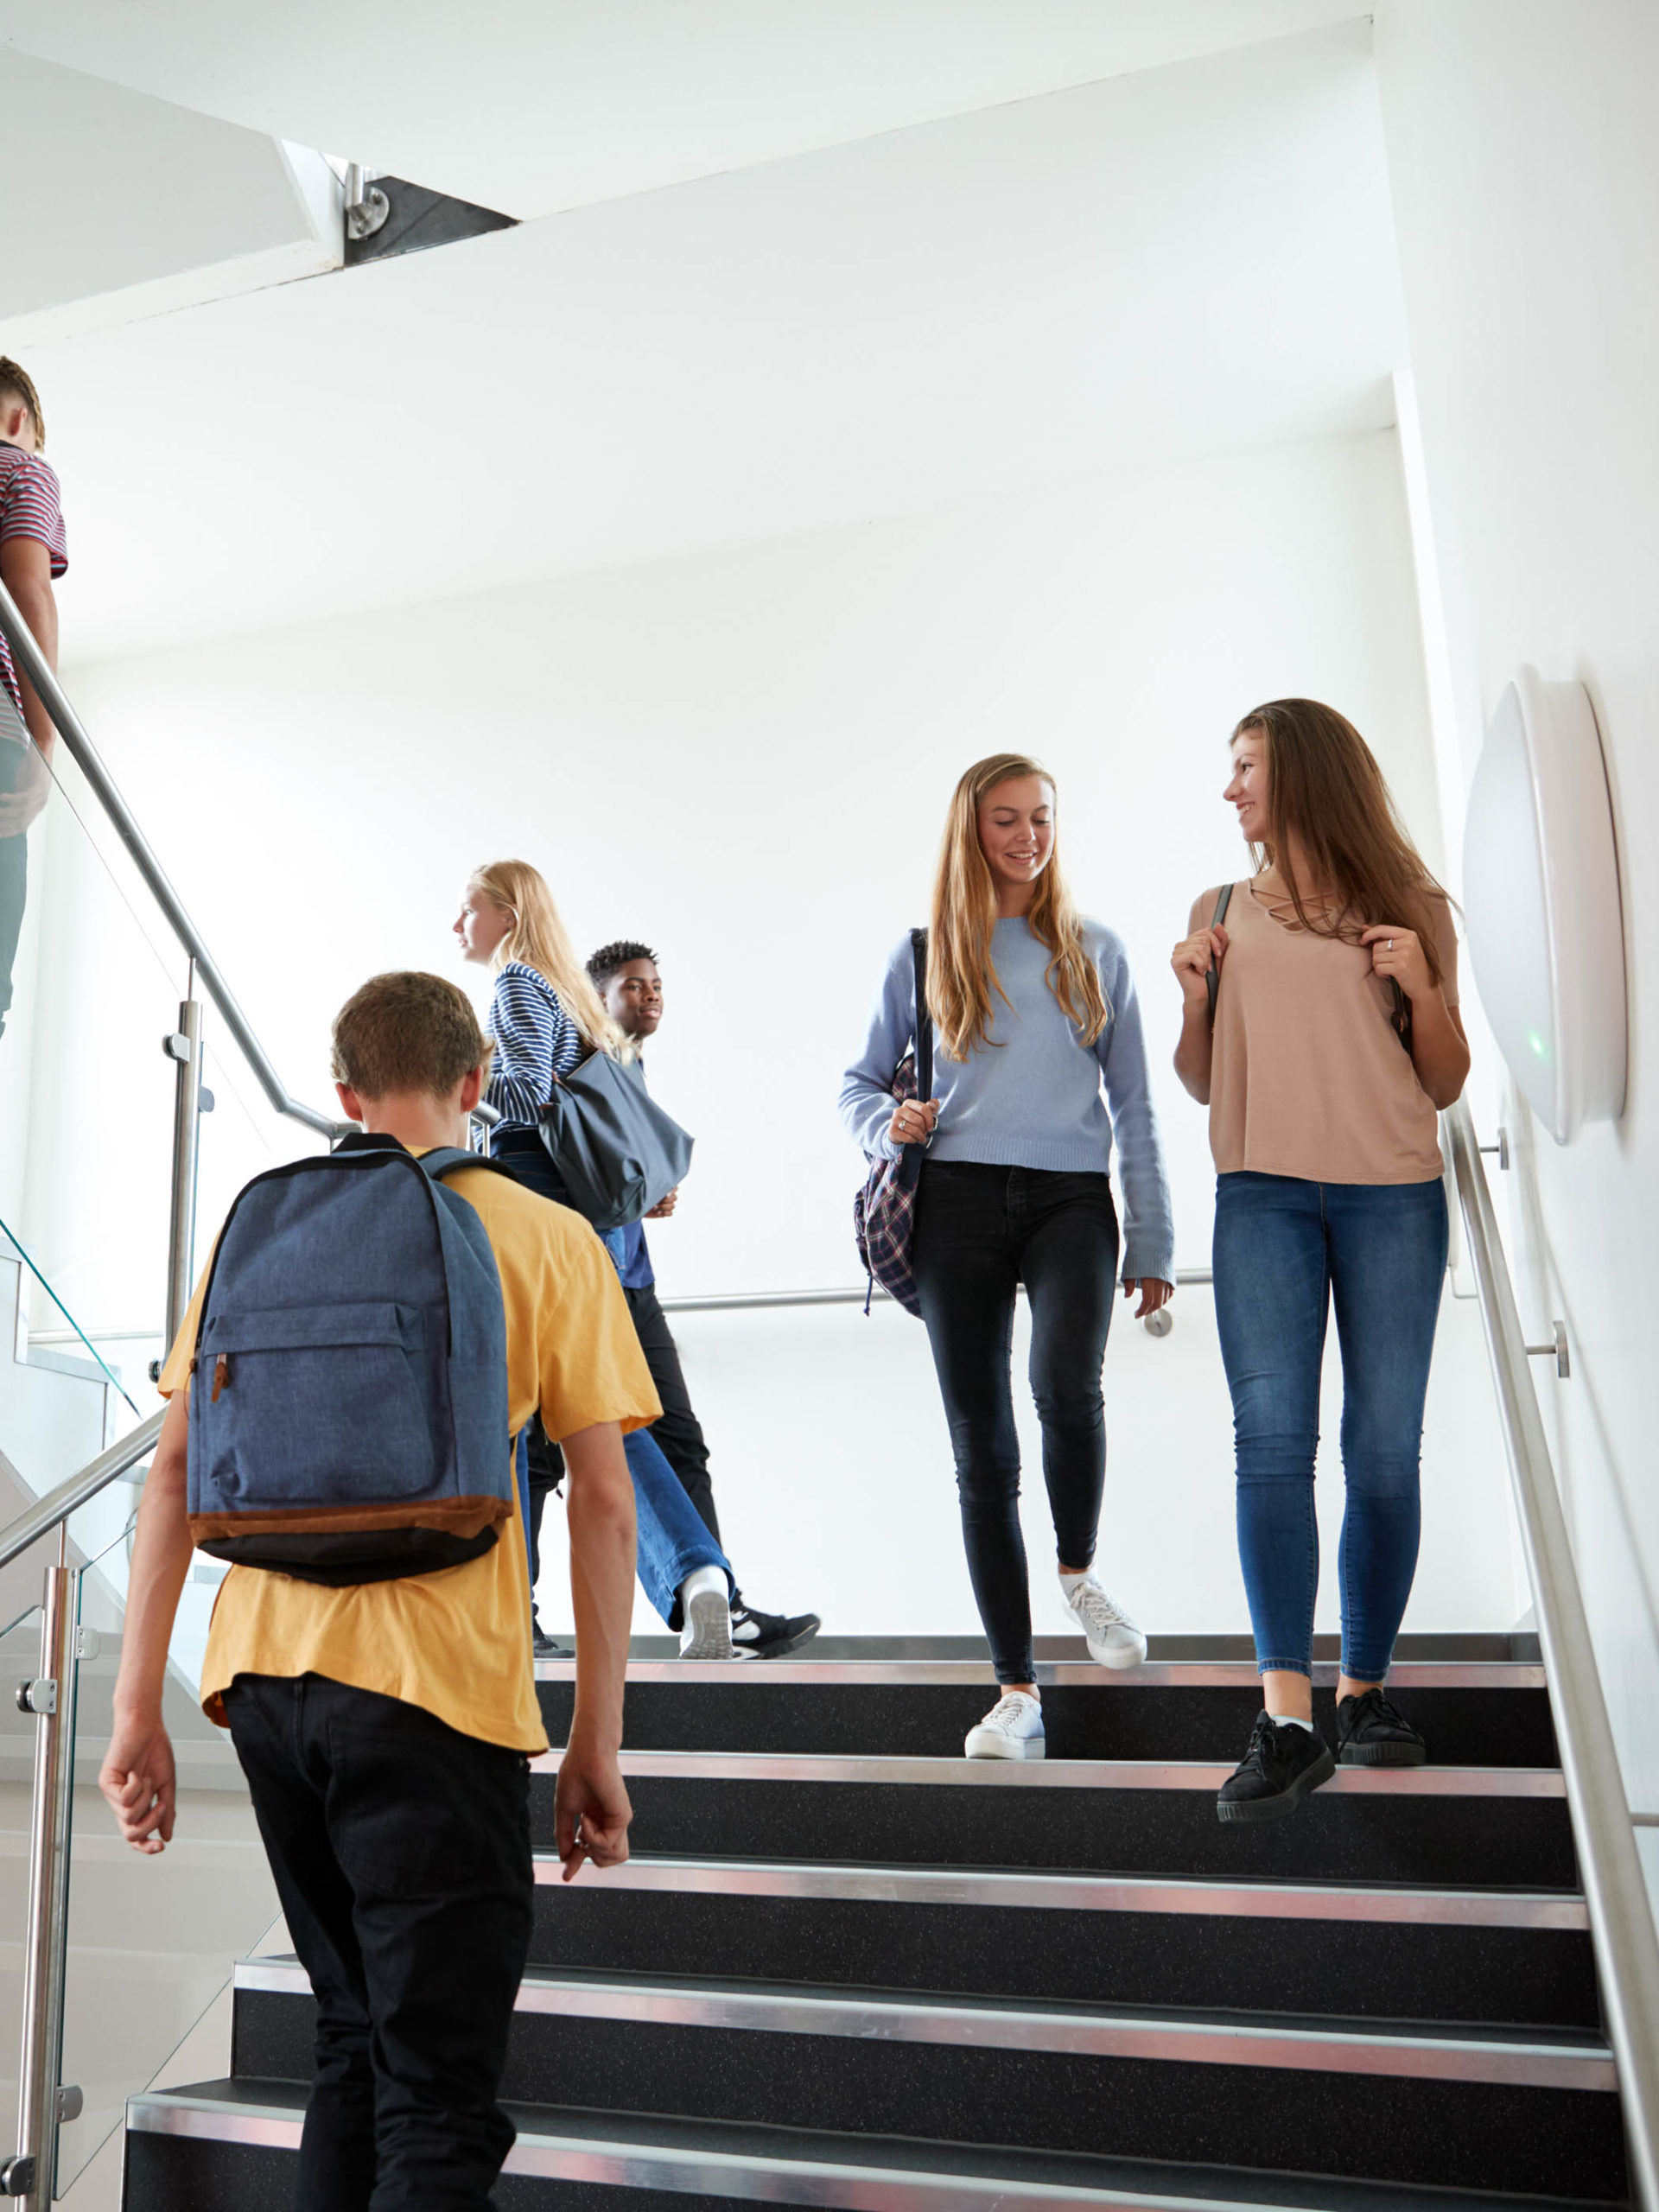 High School Students Walking On Stairs Between Lessons